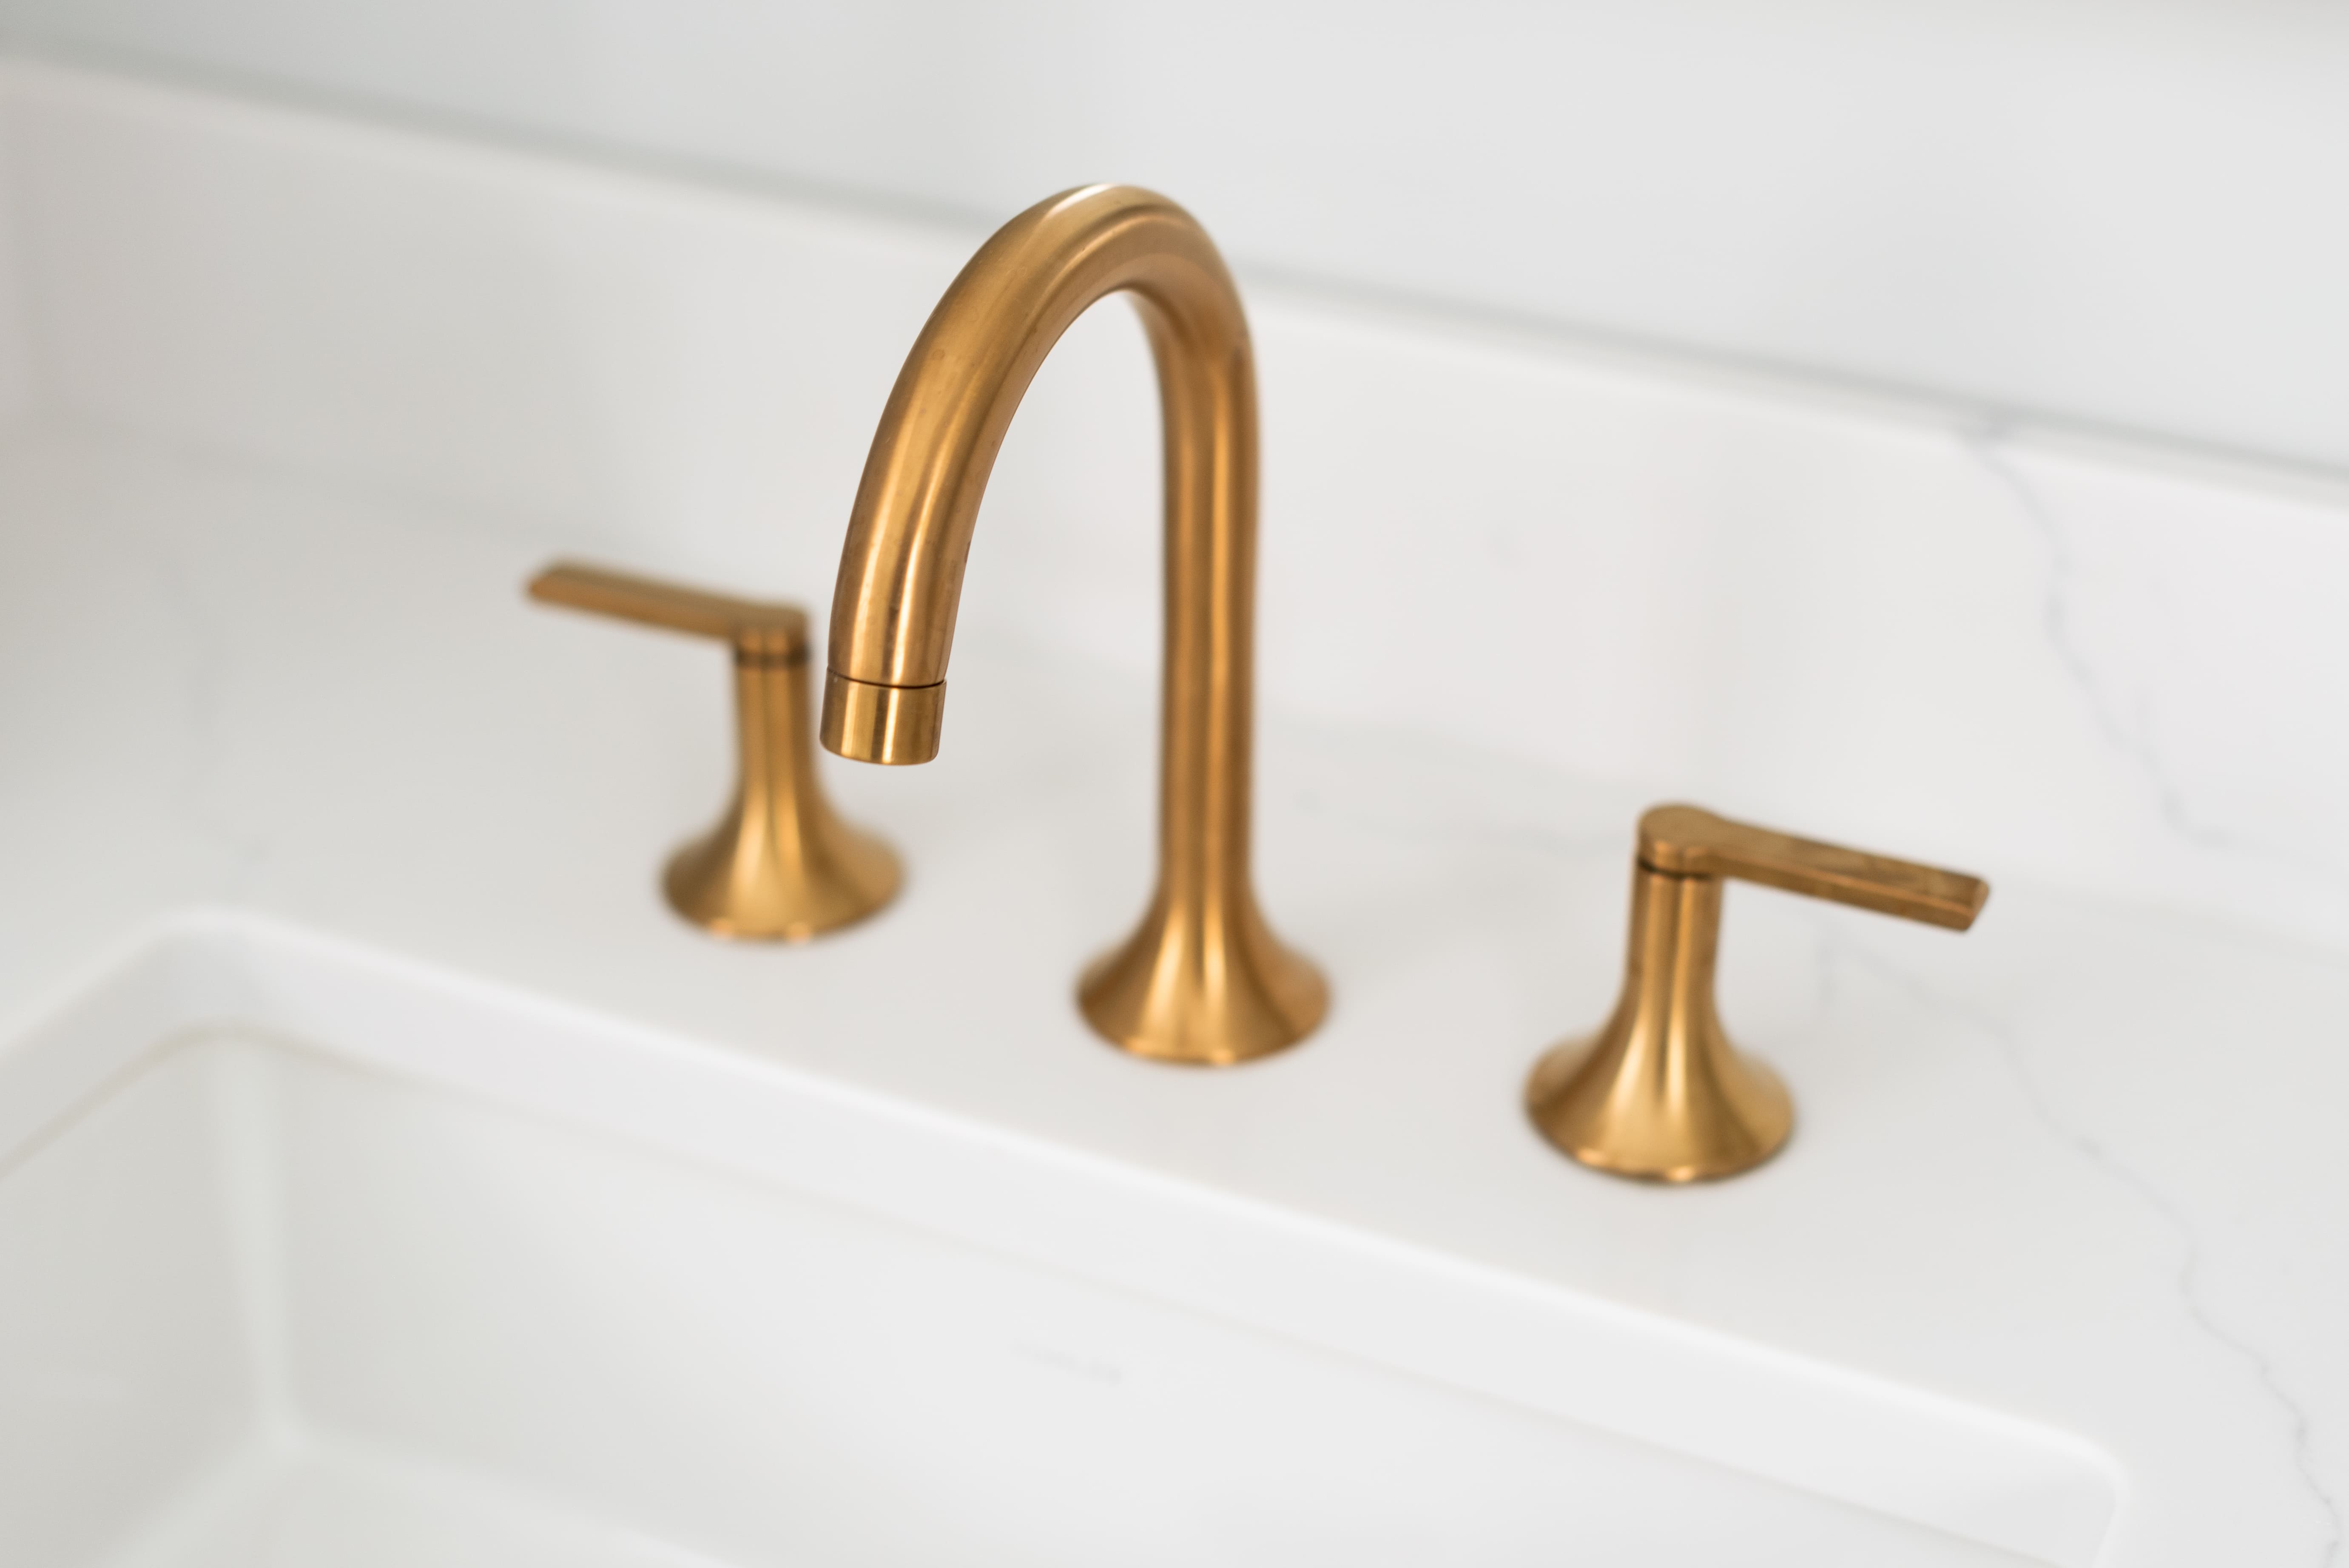 gold bathroom faucet in cleveland ohio remodel